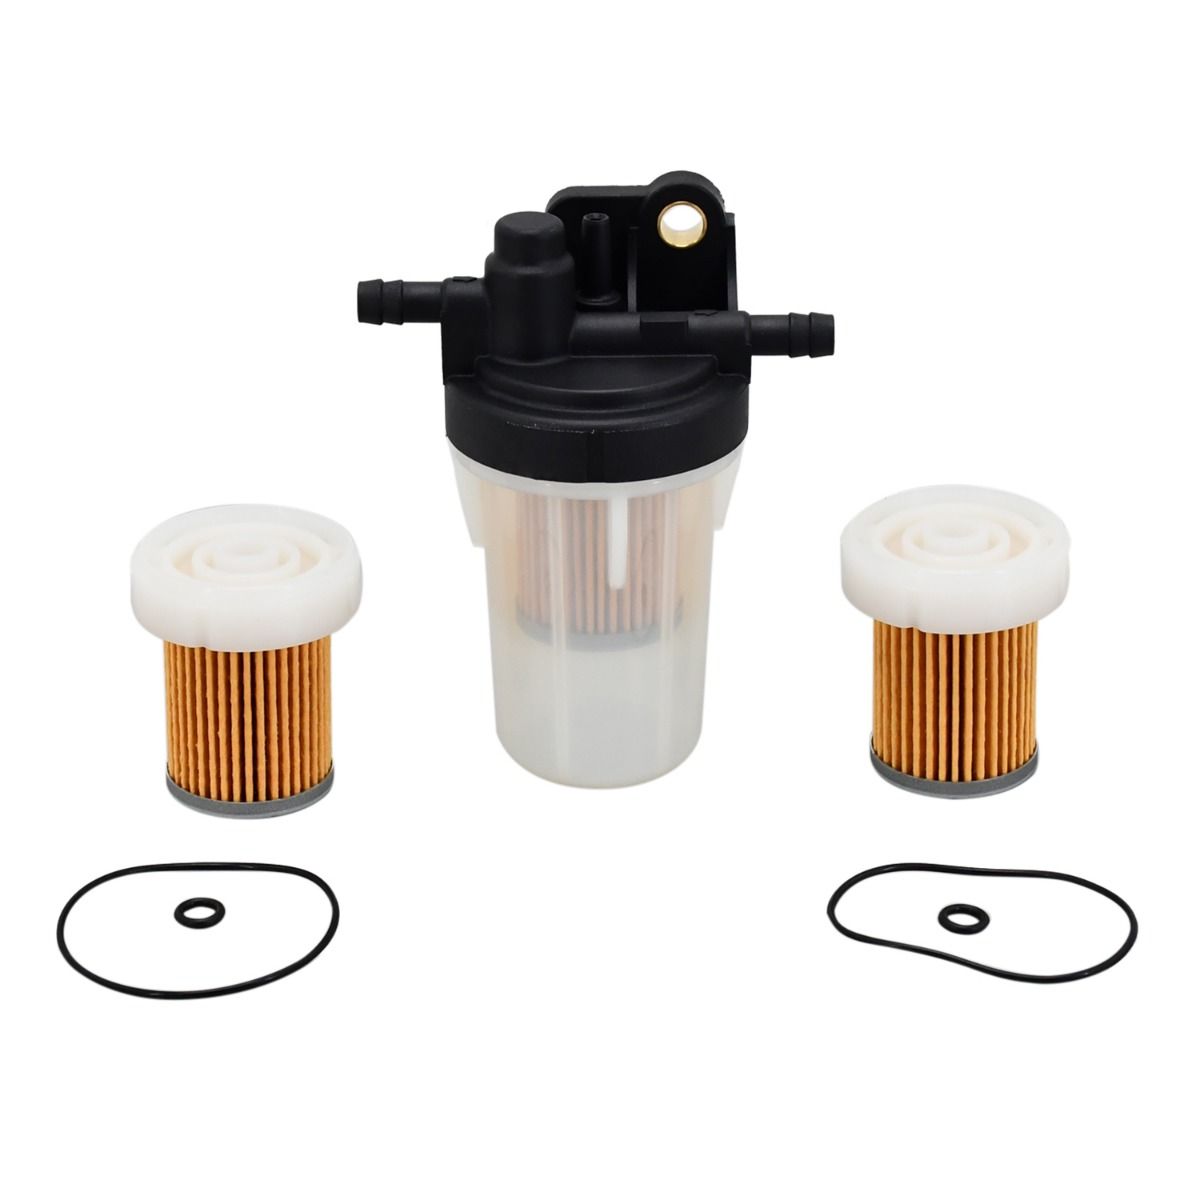 DVPARTS Fuel Filter 6A320-58862 6A320-58860 6A320-59912 Compatible with  Kubota B & L Series B2320 B2410 L2800 L3400 LX2610HSD M5640SU RTV-X1100CR